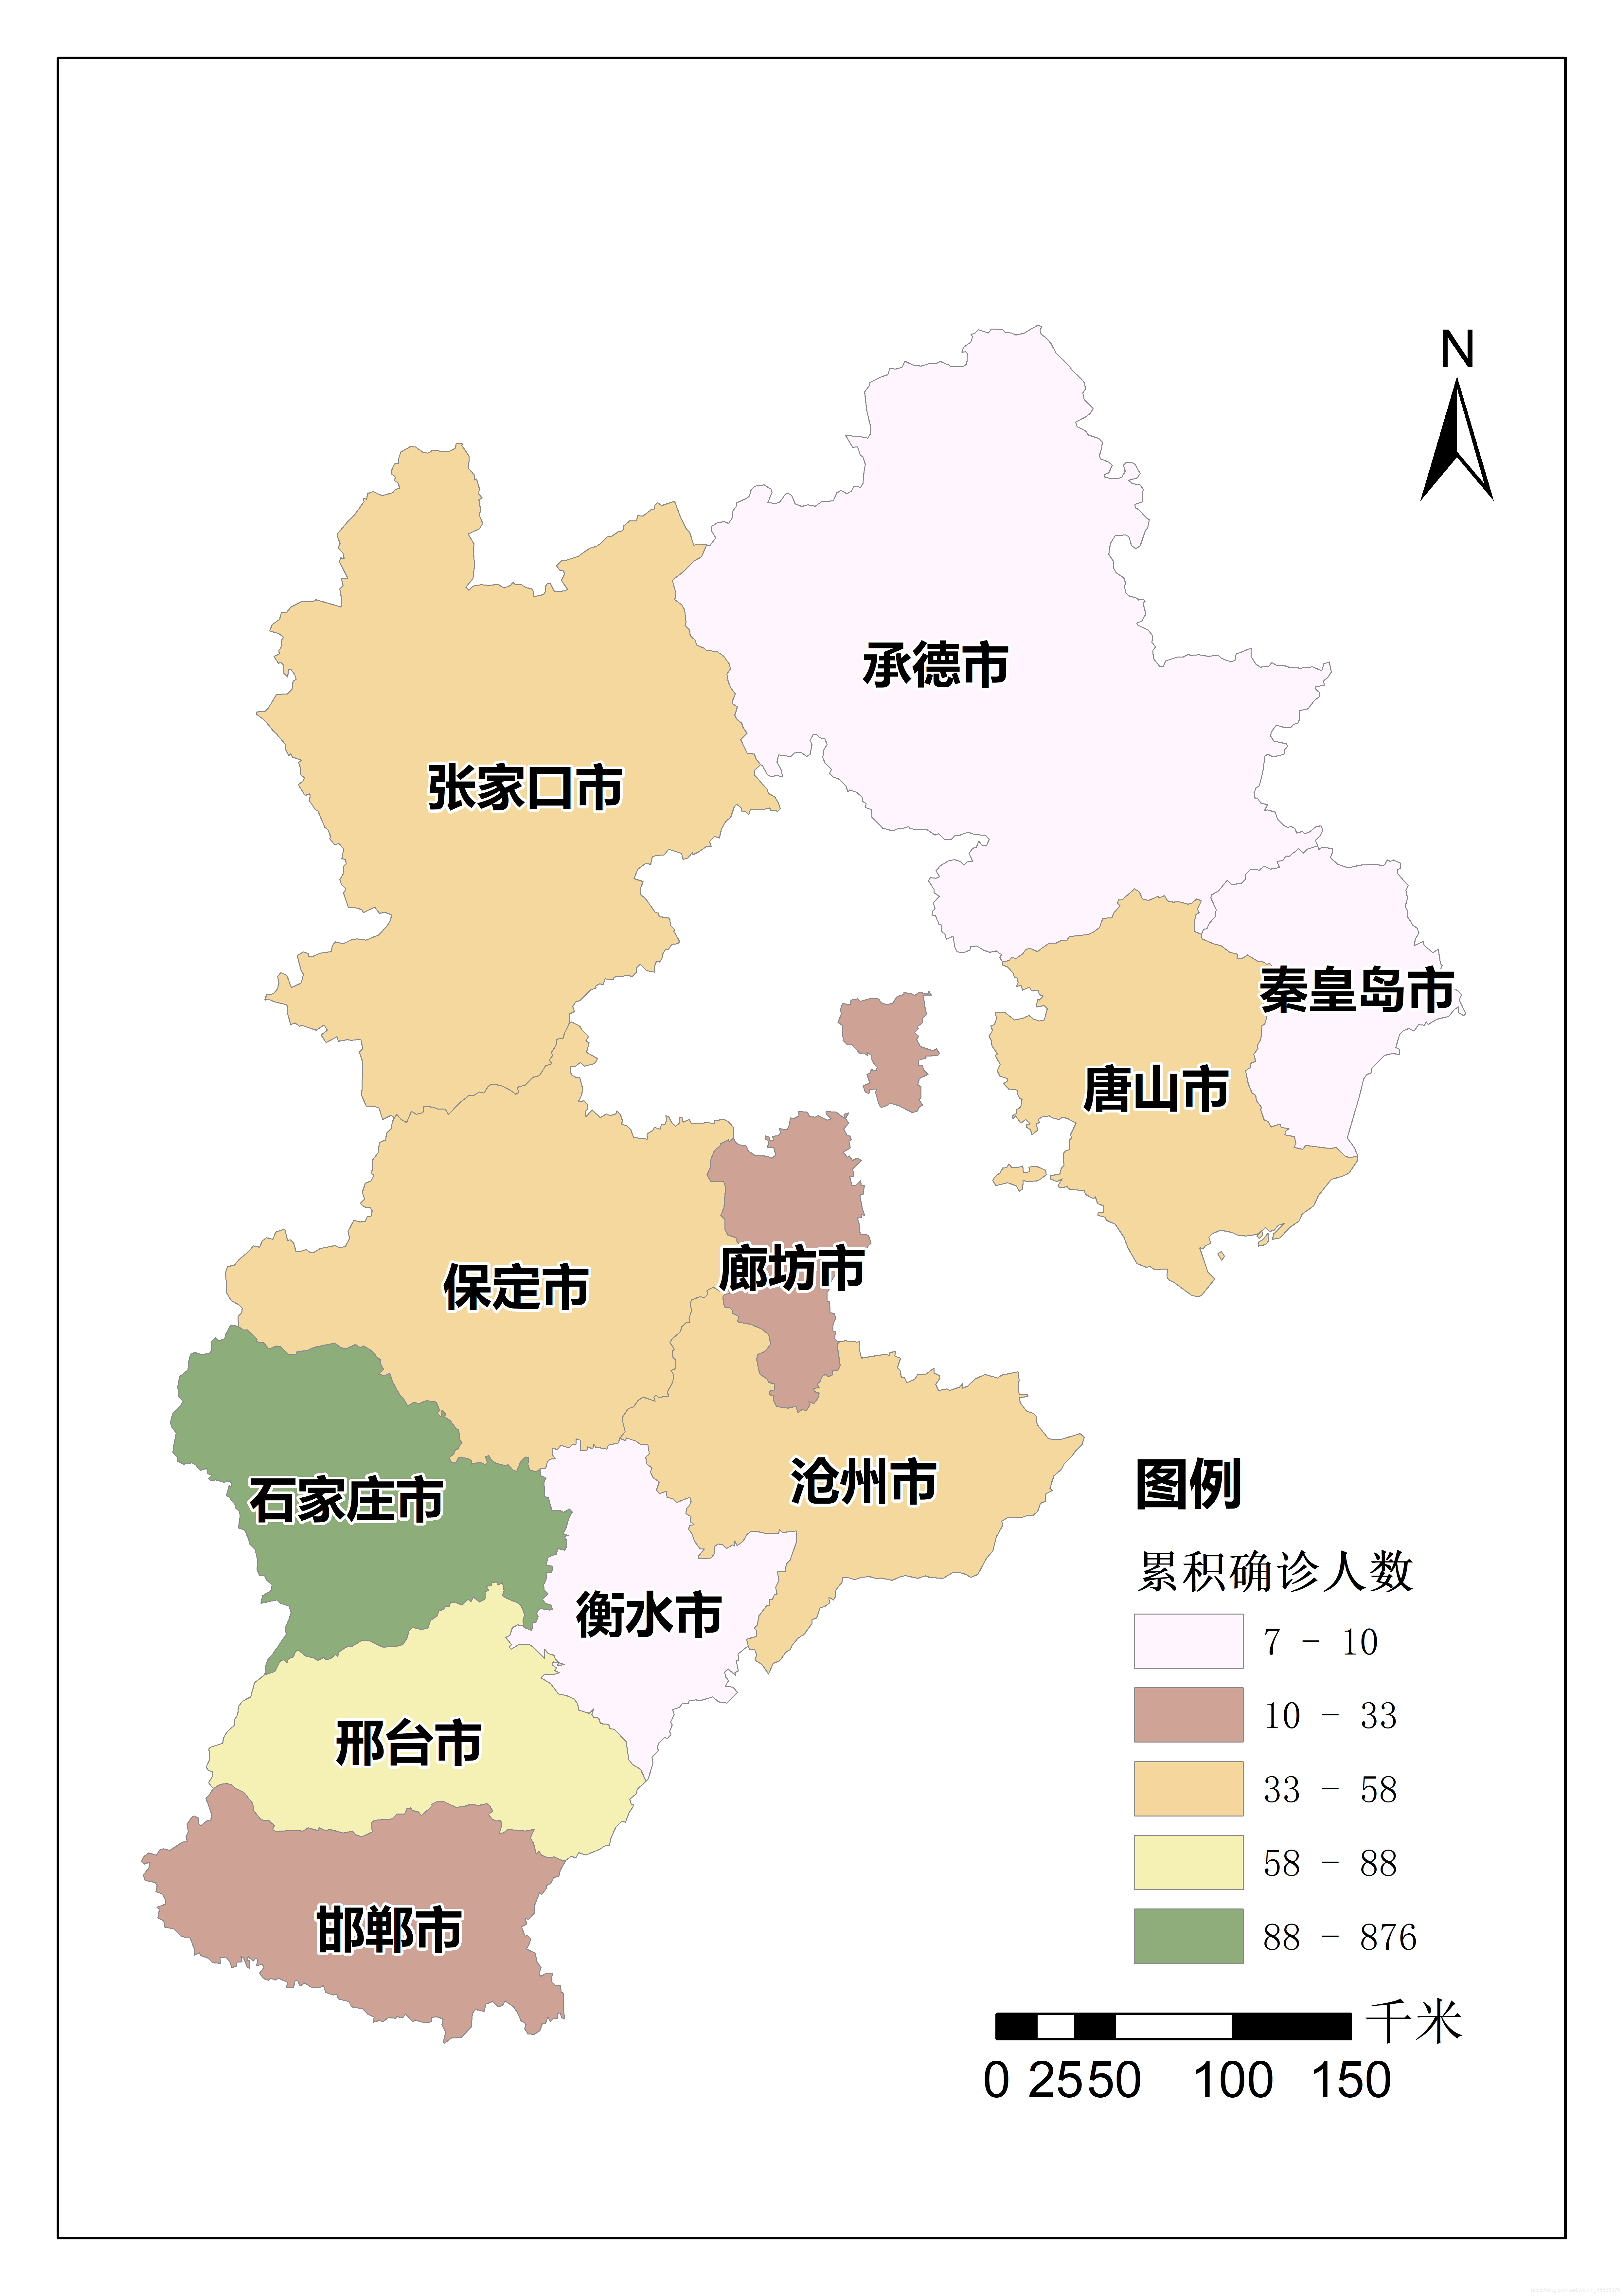 Distribution map of cumulative confirmed data of COVID-19 epidemic in Hebei Province on January 24